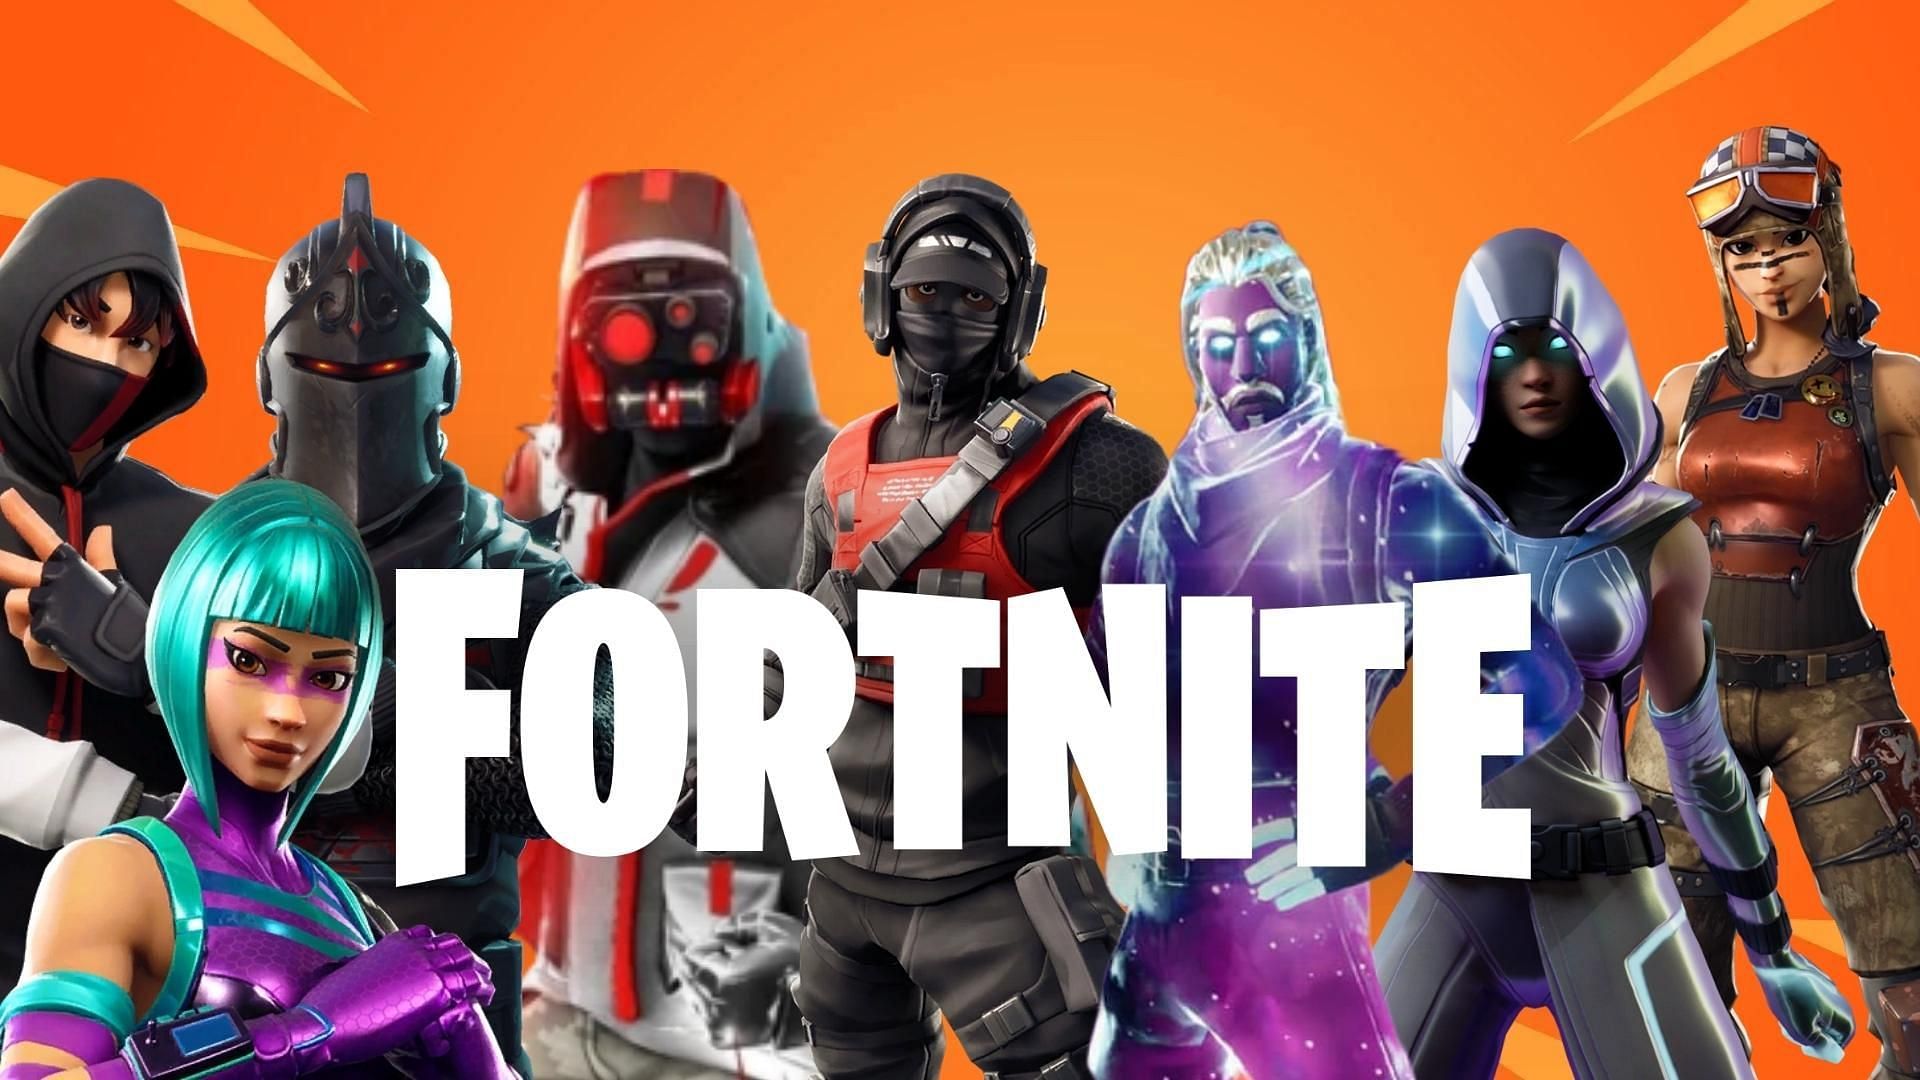 8 Fortnite skins that make an account highly valuable